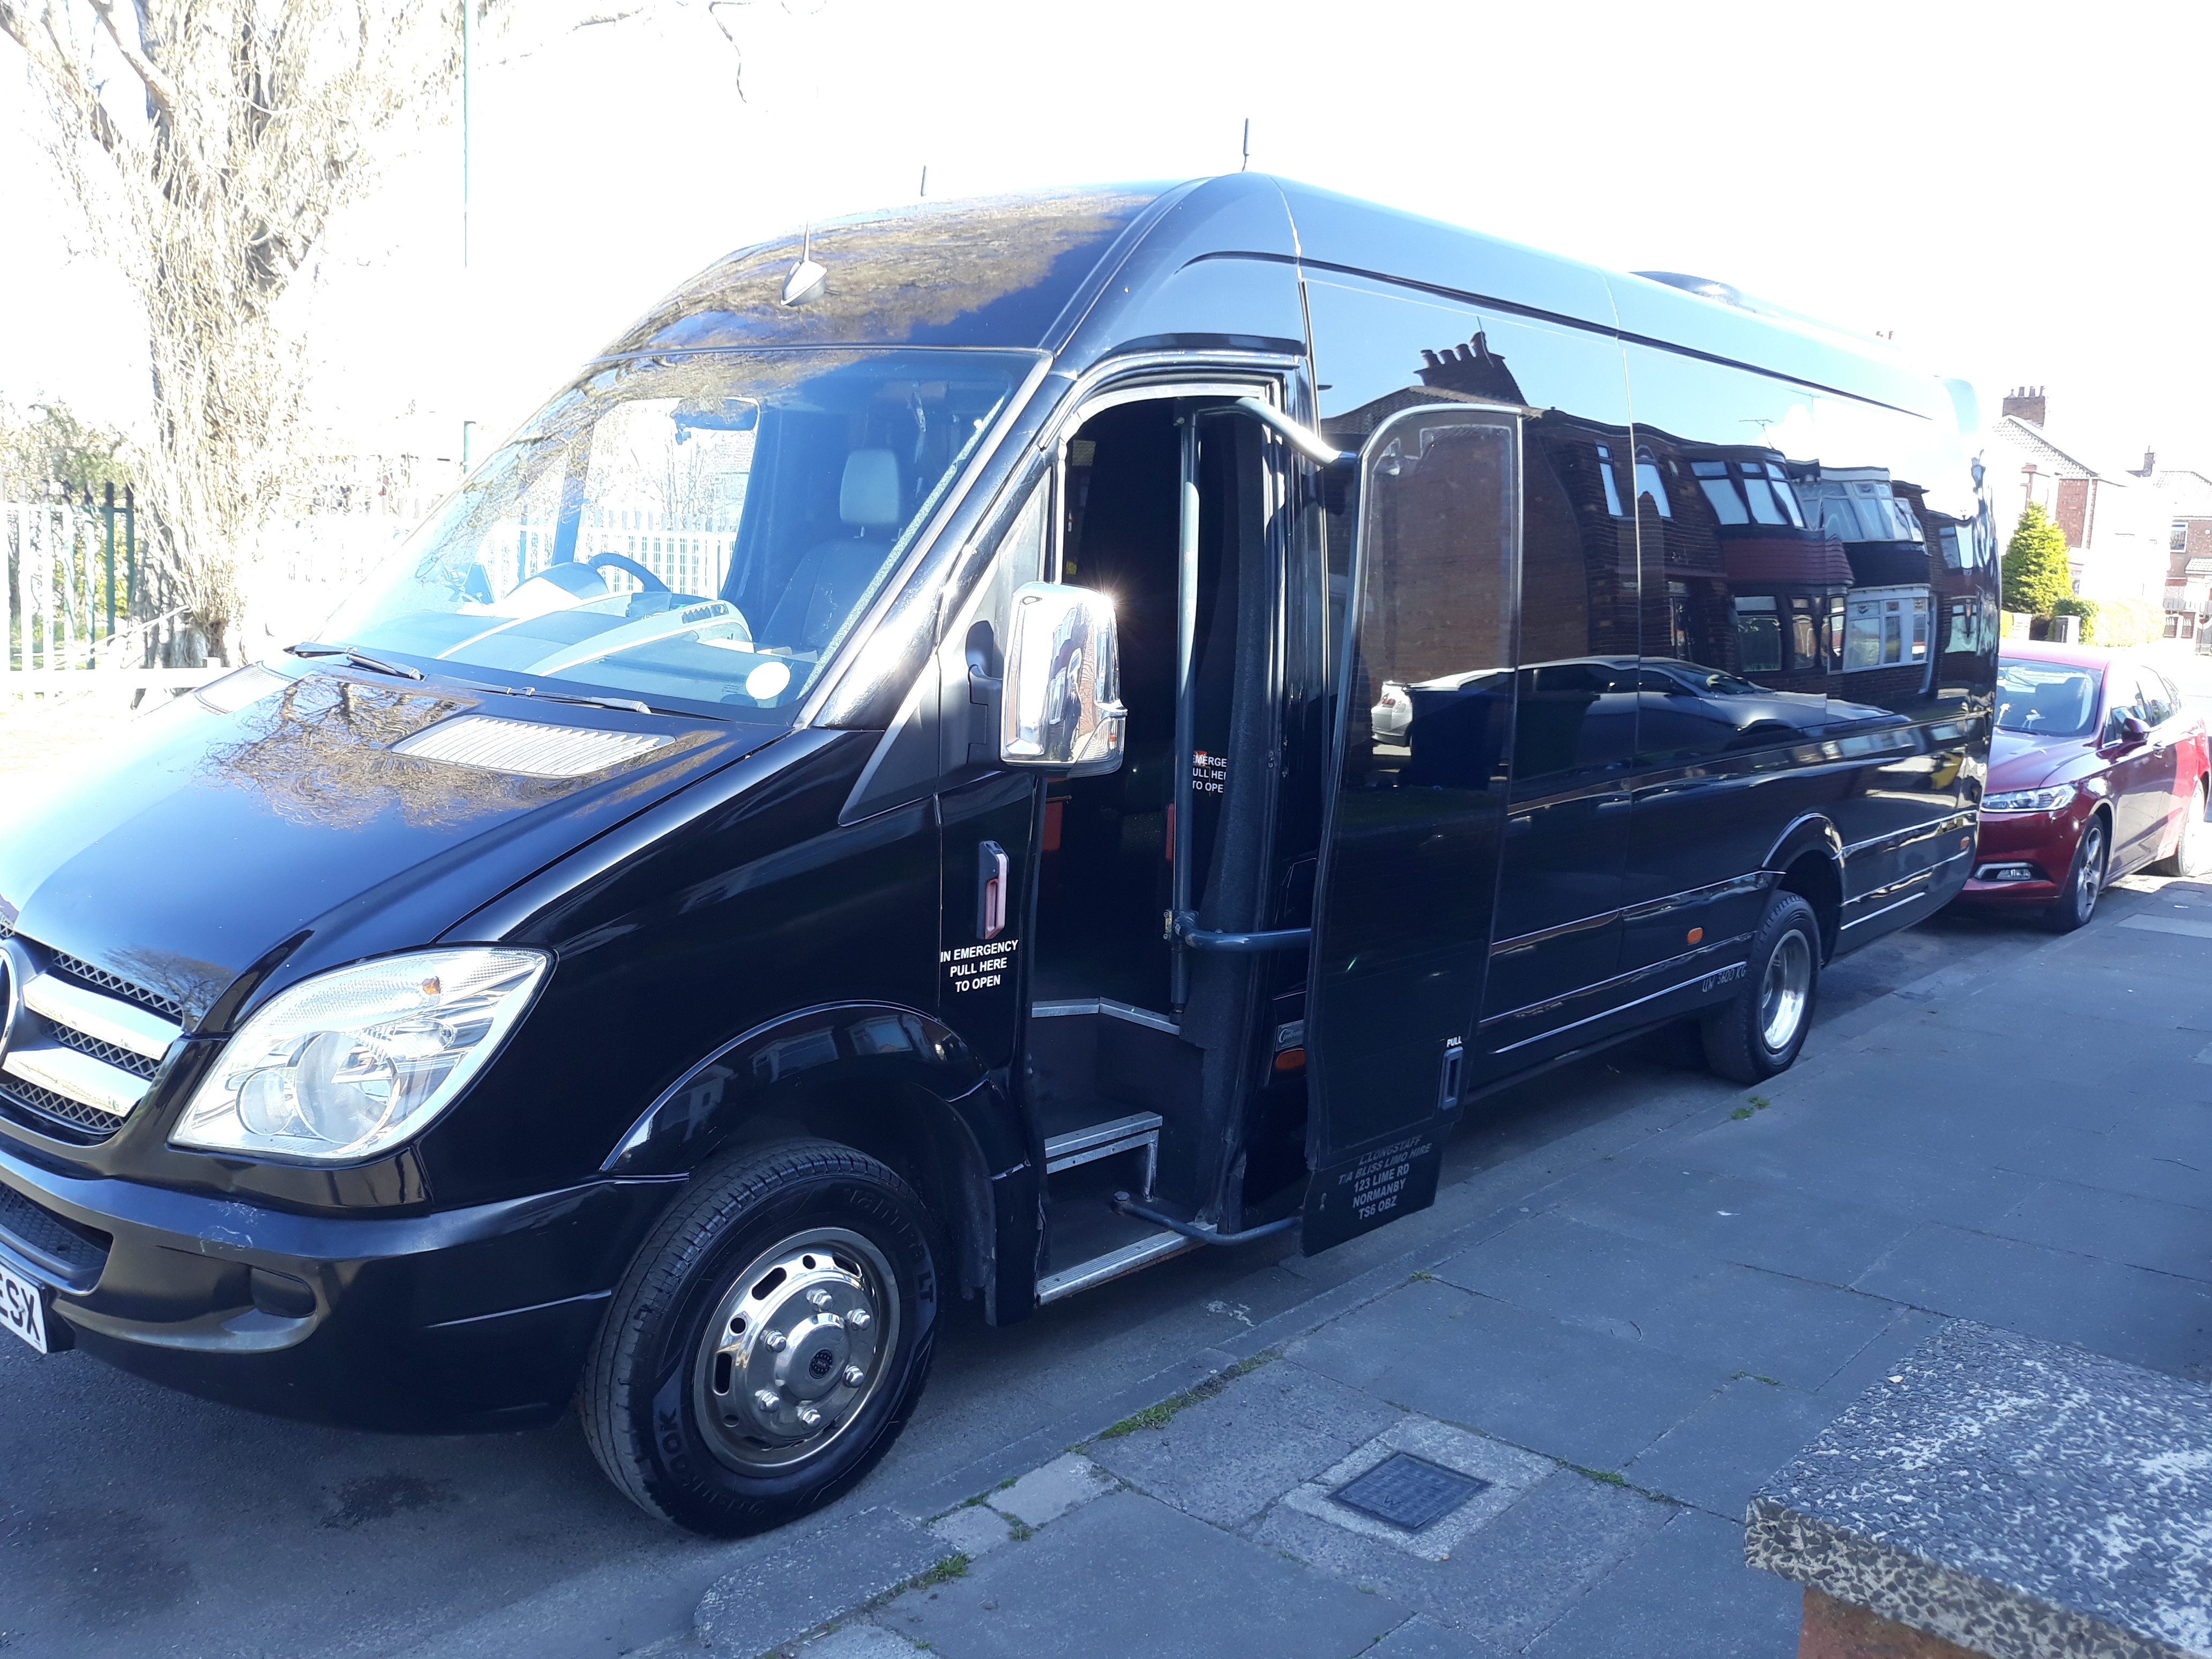 childrens party bus hire Teesside